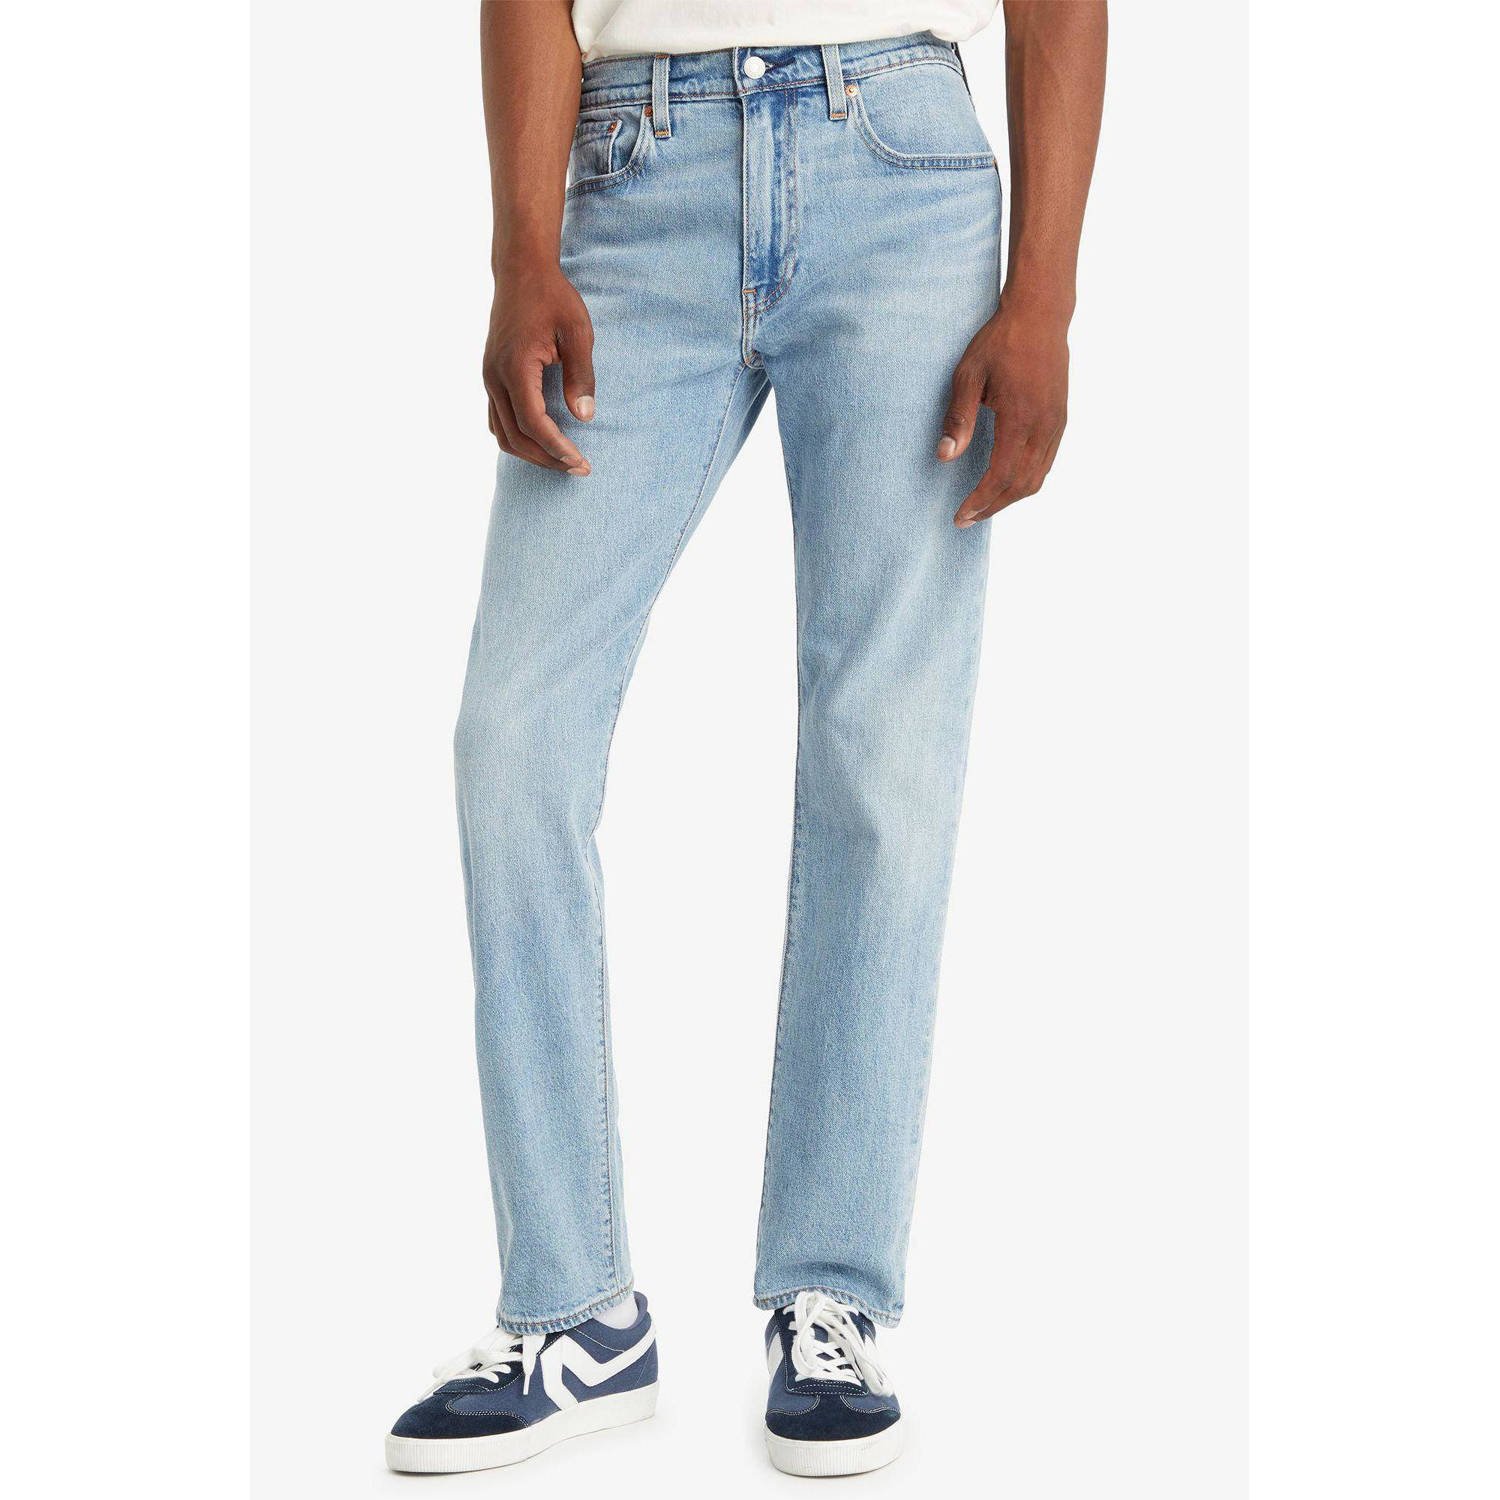 Levi's 502 tapered fit jeans call it off